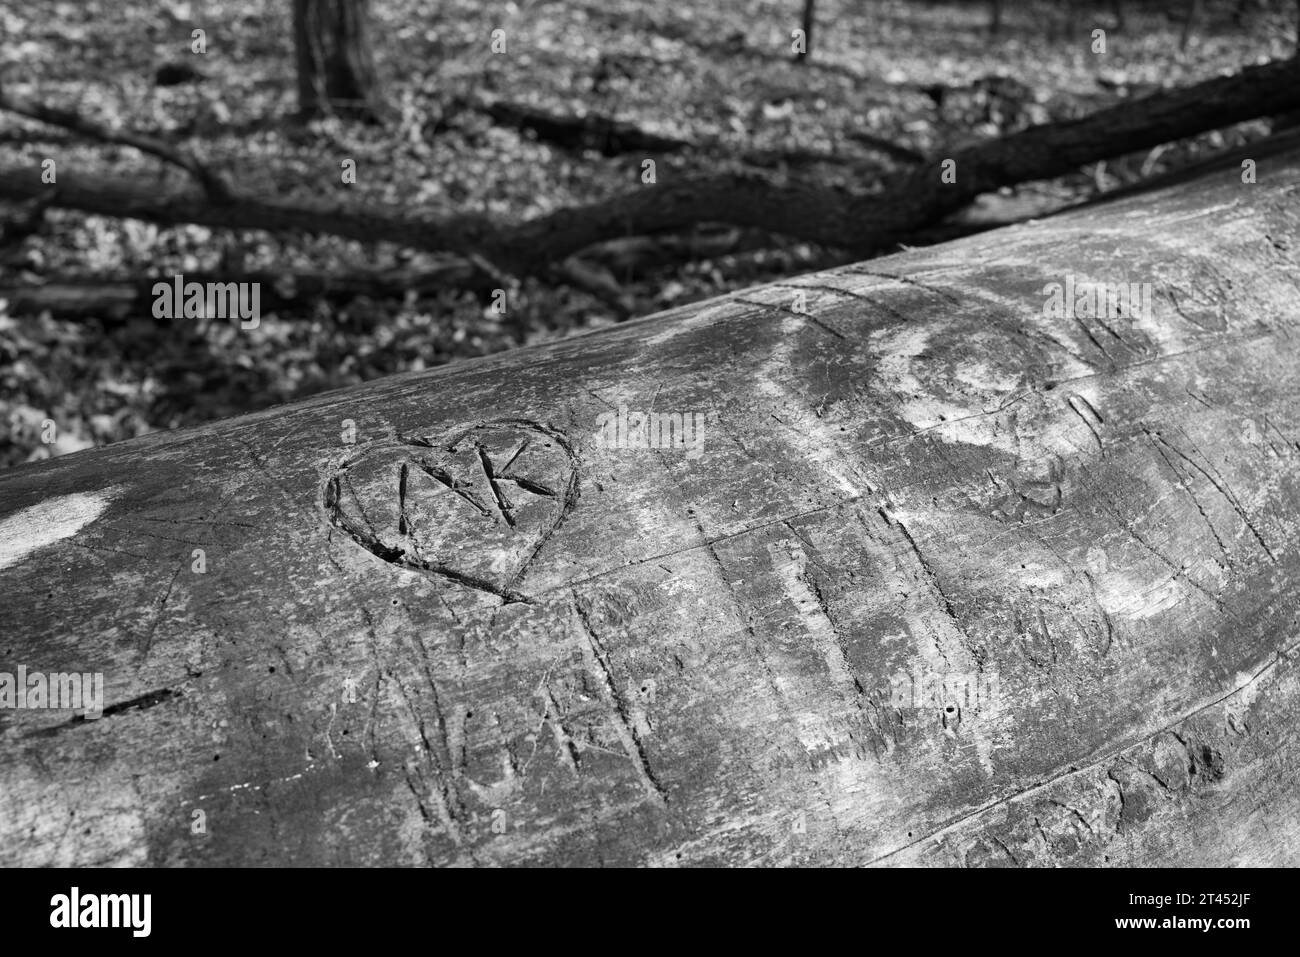 Graffiti and initials, in a heart shape, carved on a felled tree in the woods Stock Photo